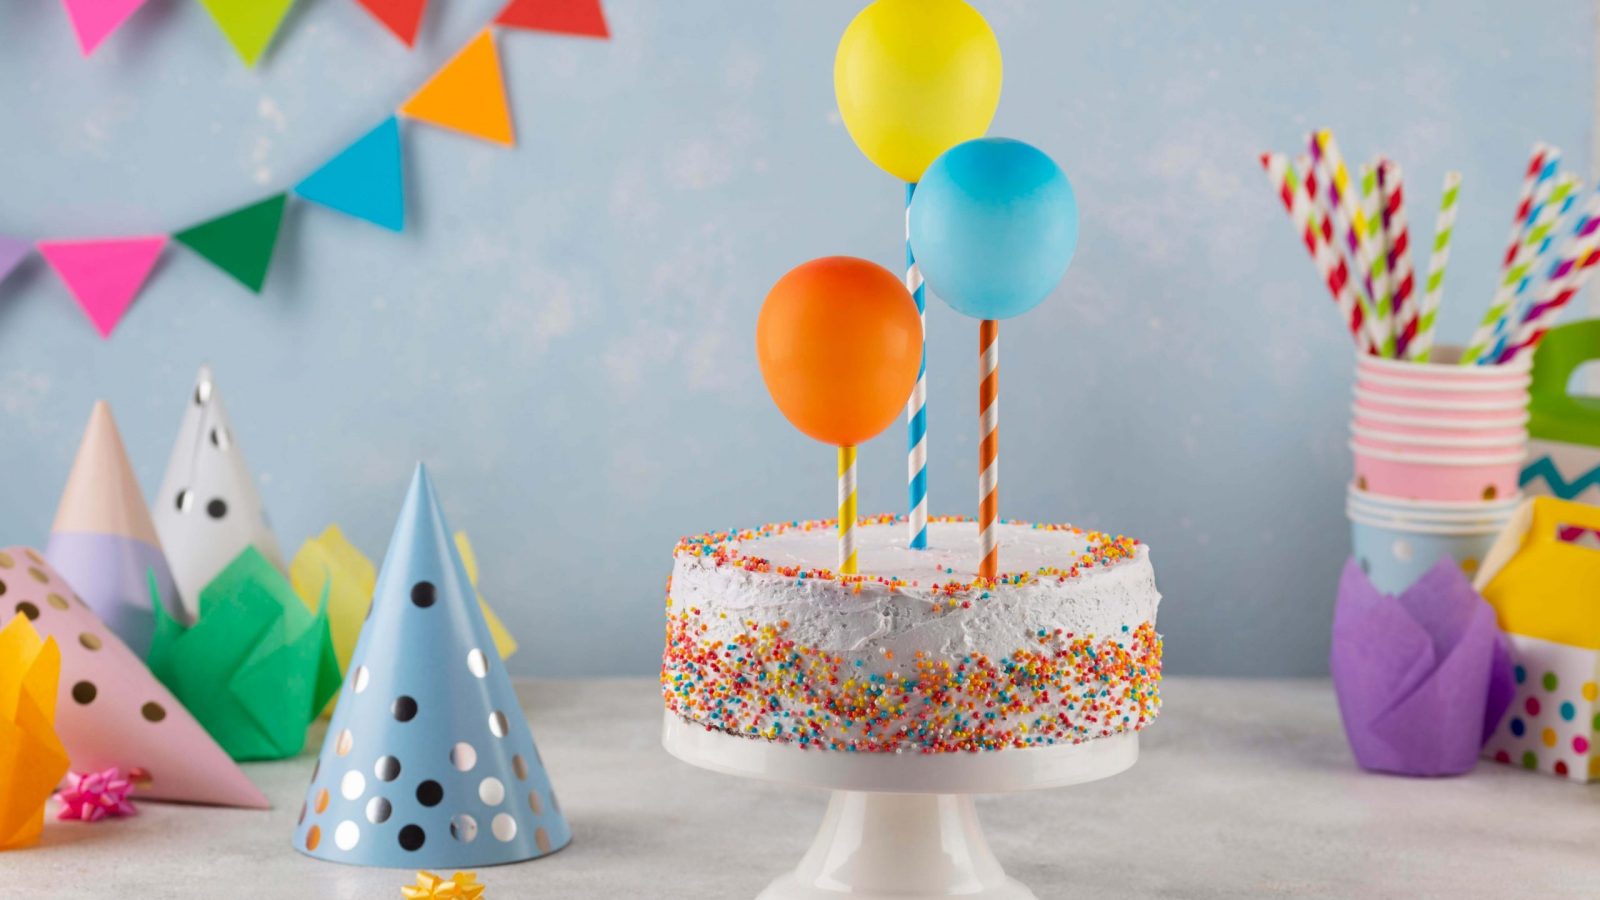 assortment-with-tasty-cake-balloons (1)